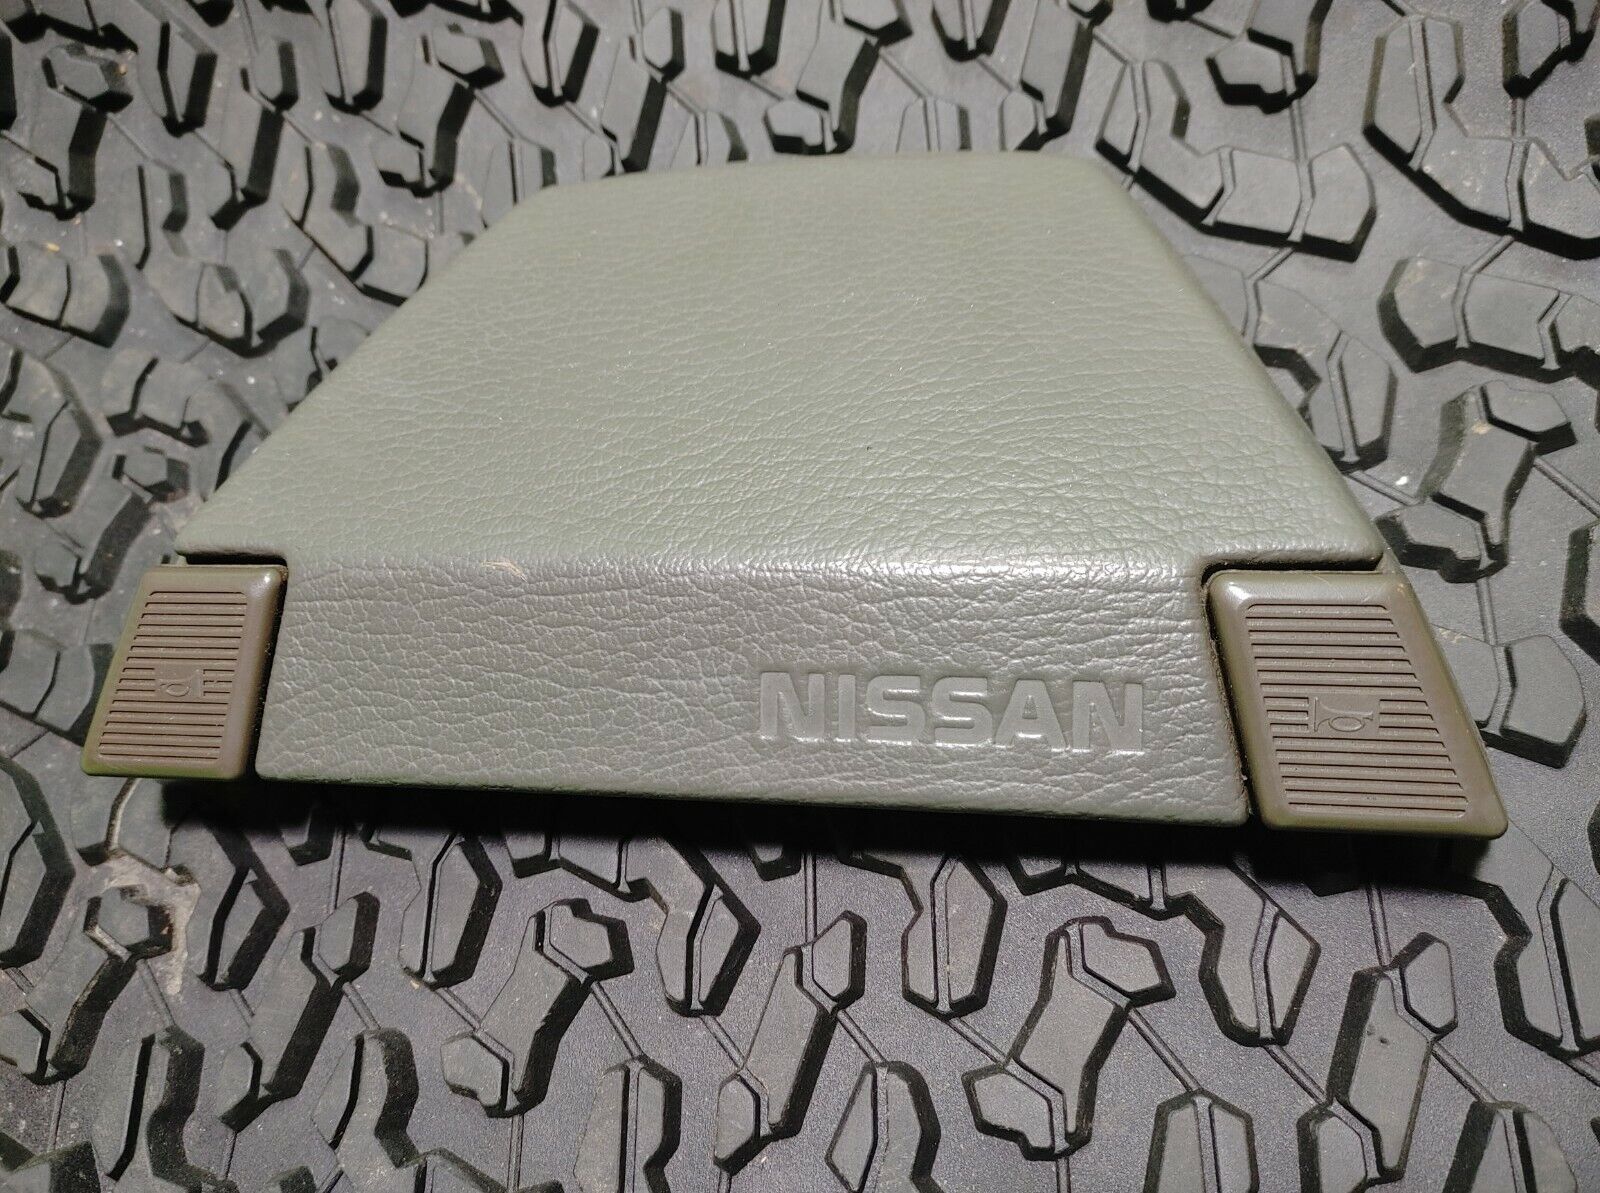 1987 NISSAN Stanza GXE STEERING WHEEL HORN PAD CENTER COVER OEM W/Buttons